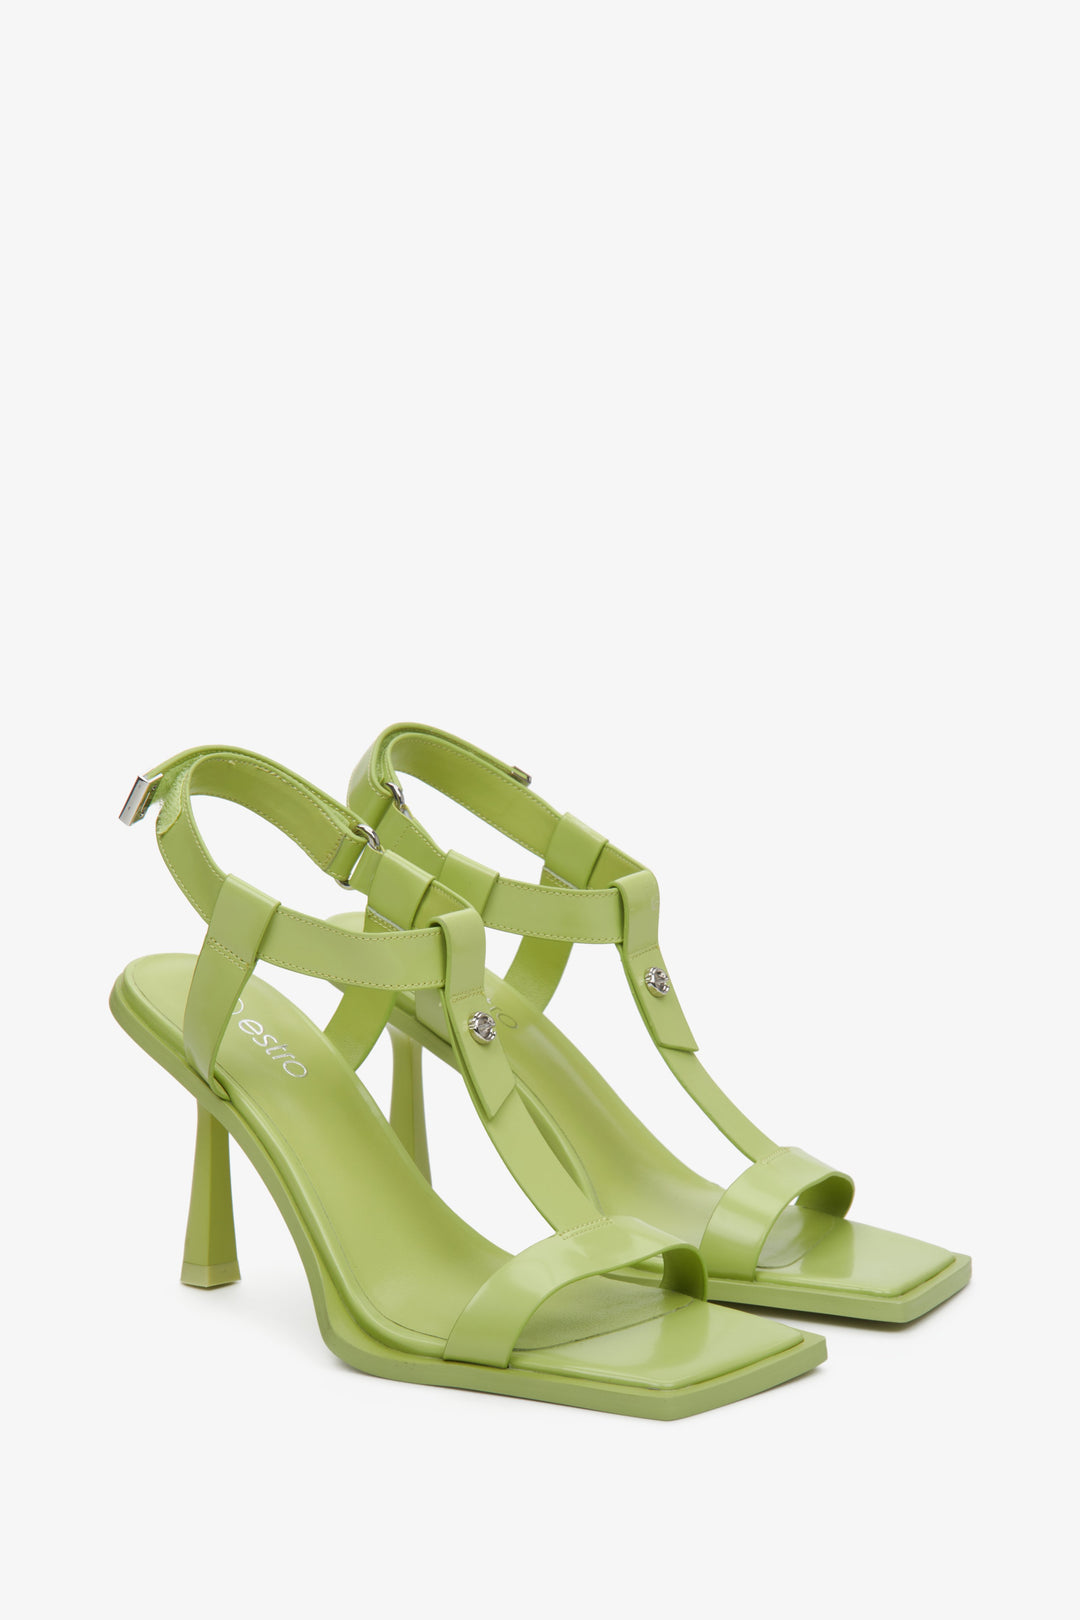 T-Bar light green strappy sandals on a high heel Estro - a close-up on shoe profile.